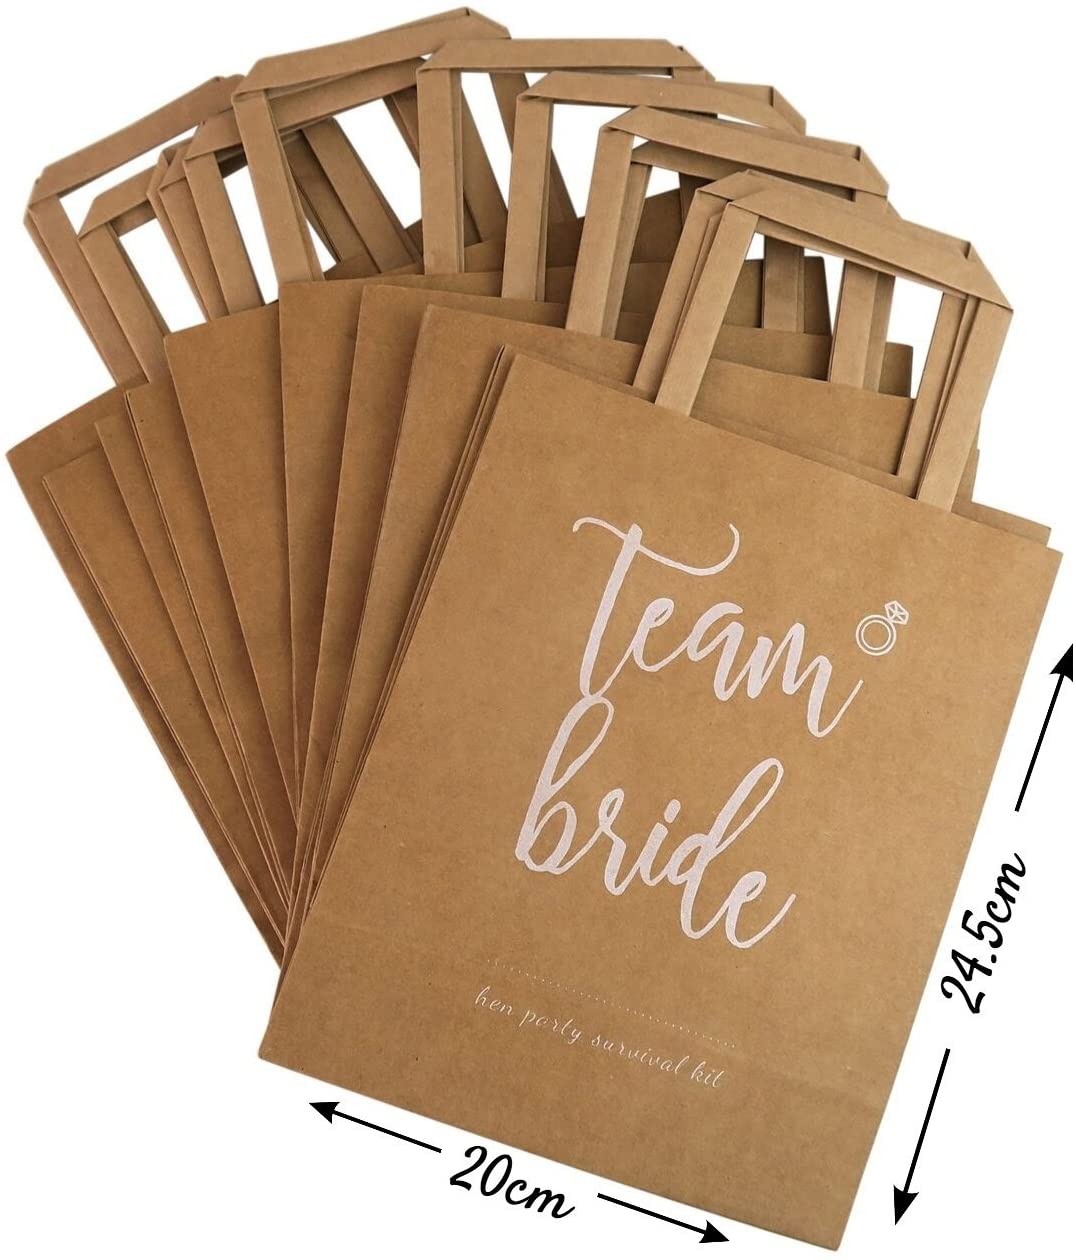 Pack of 5 Hen Party Bags with 'Team Bride' Text - The Hen Planner